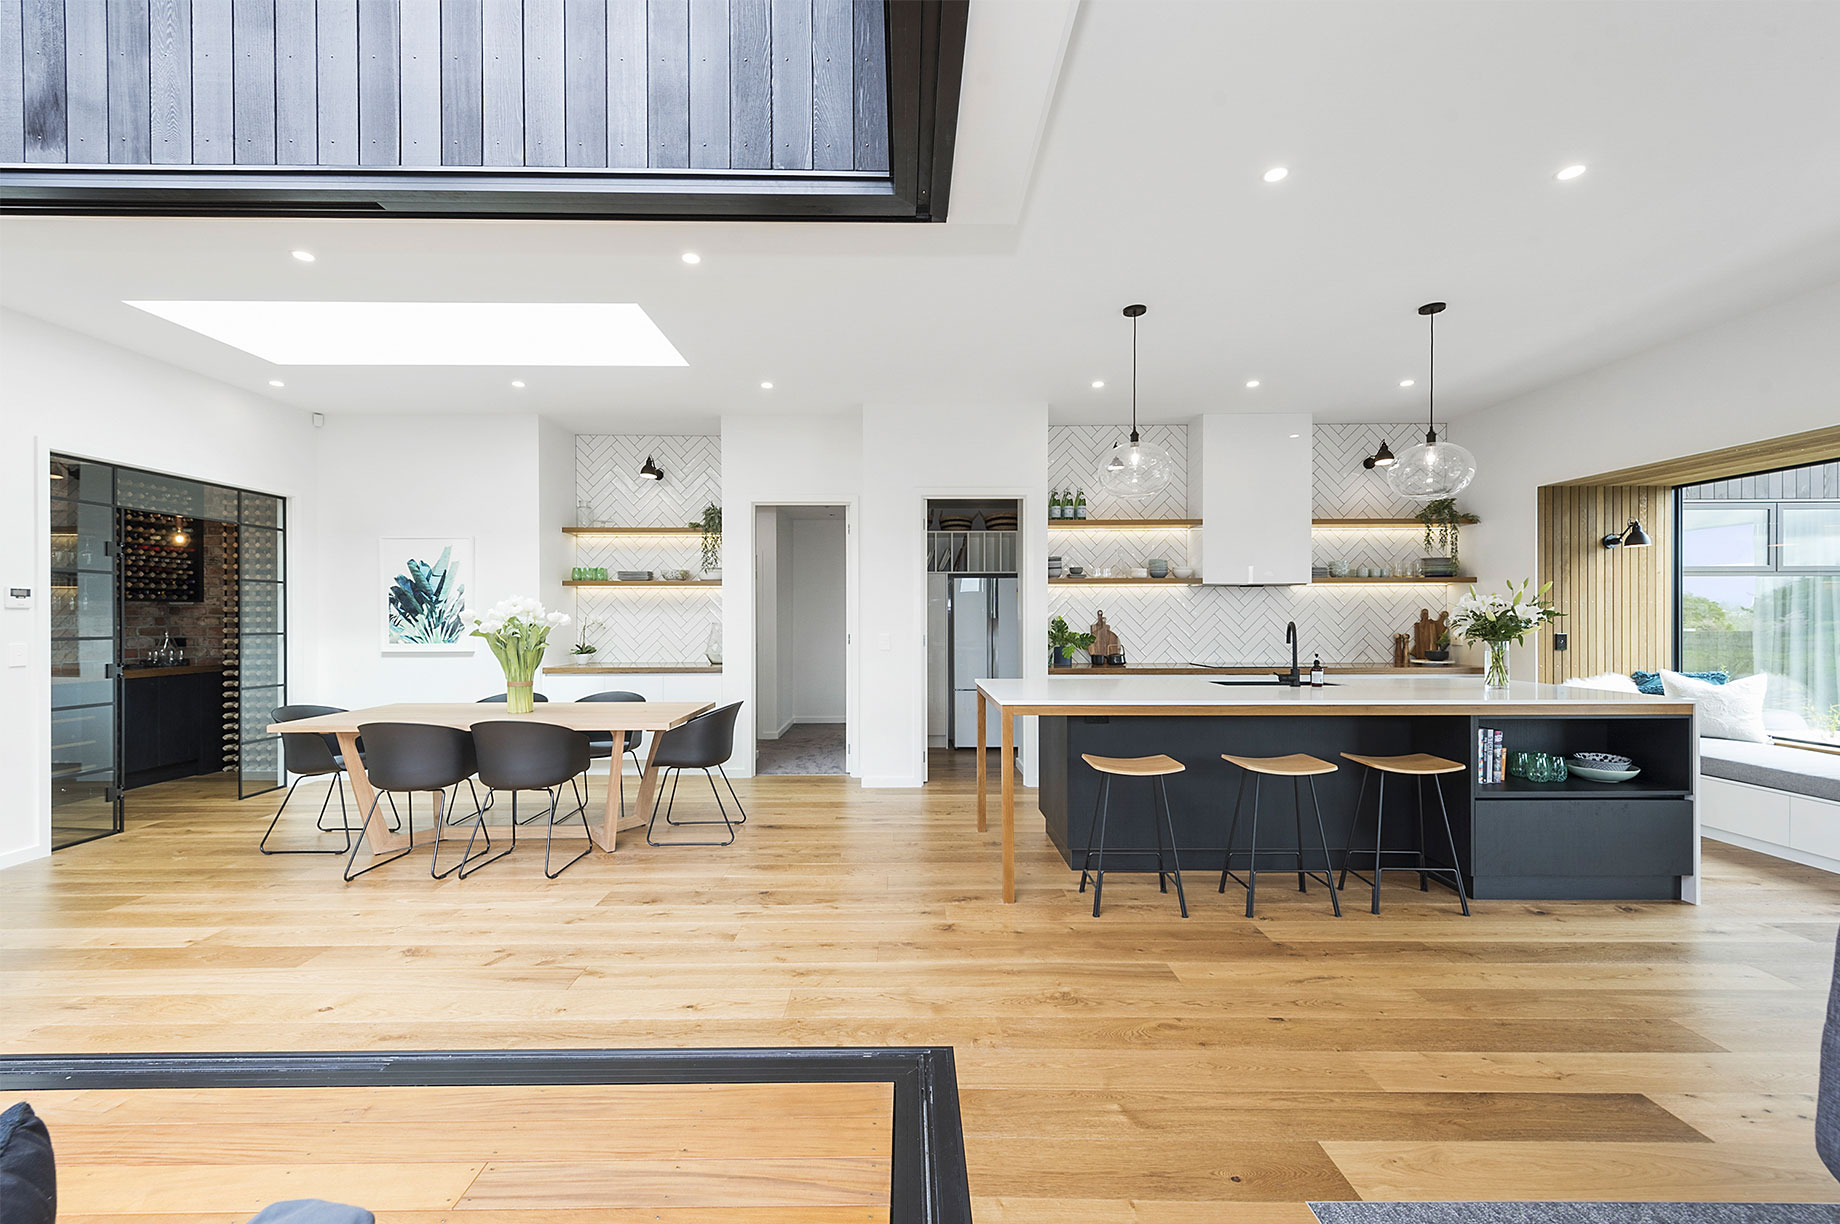 Waikato showhome kitchen and dining area